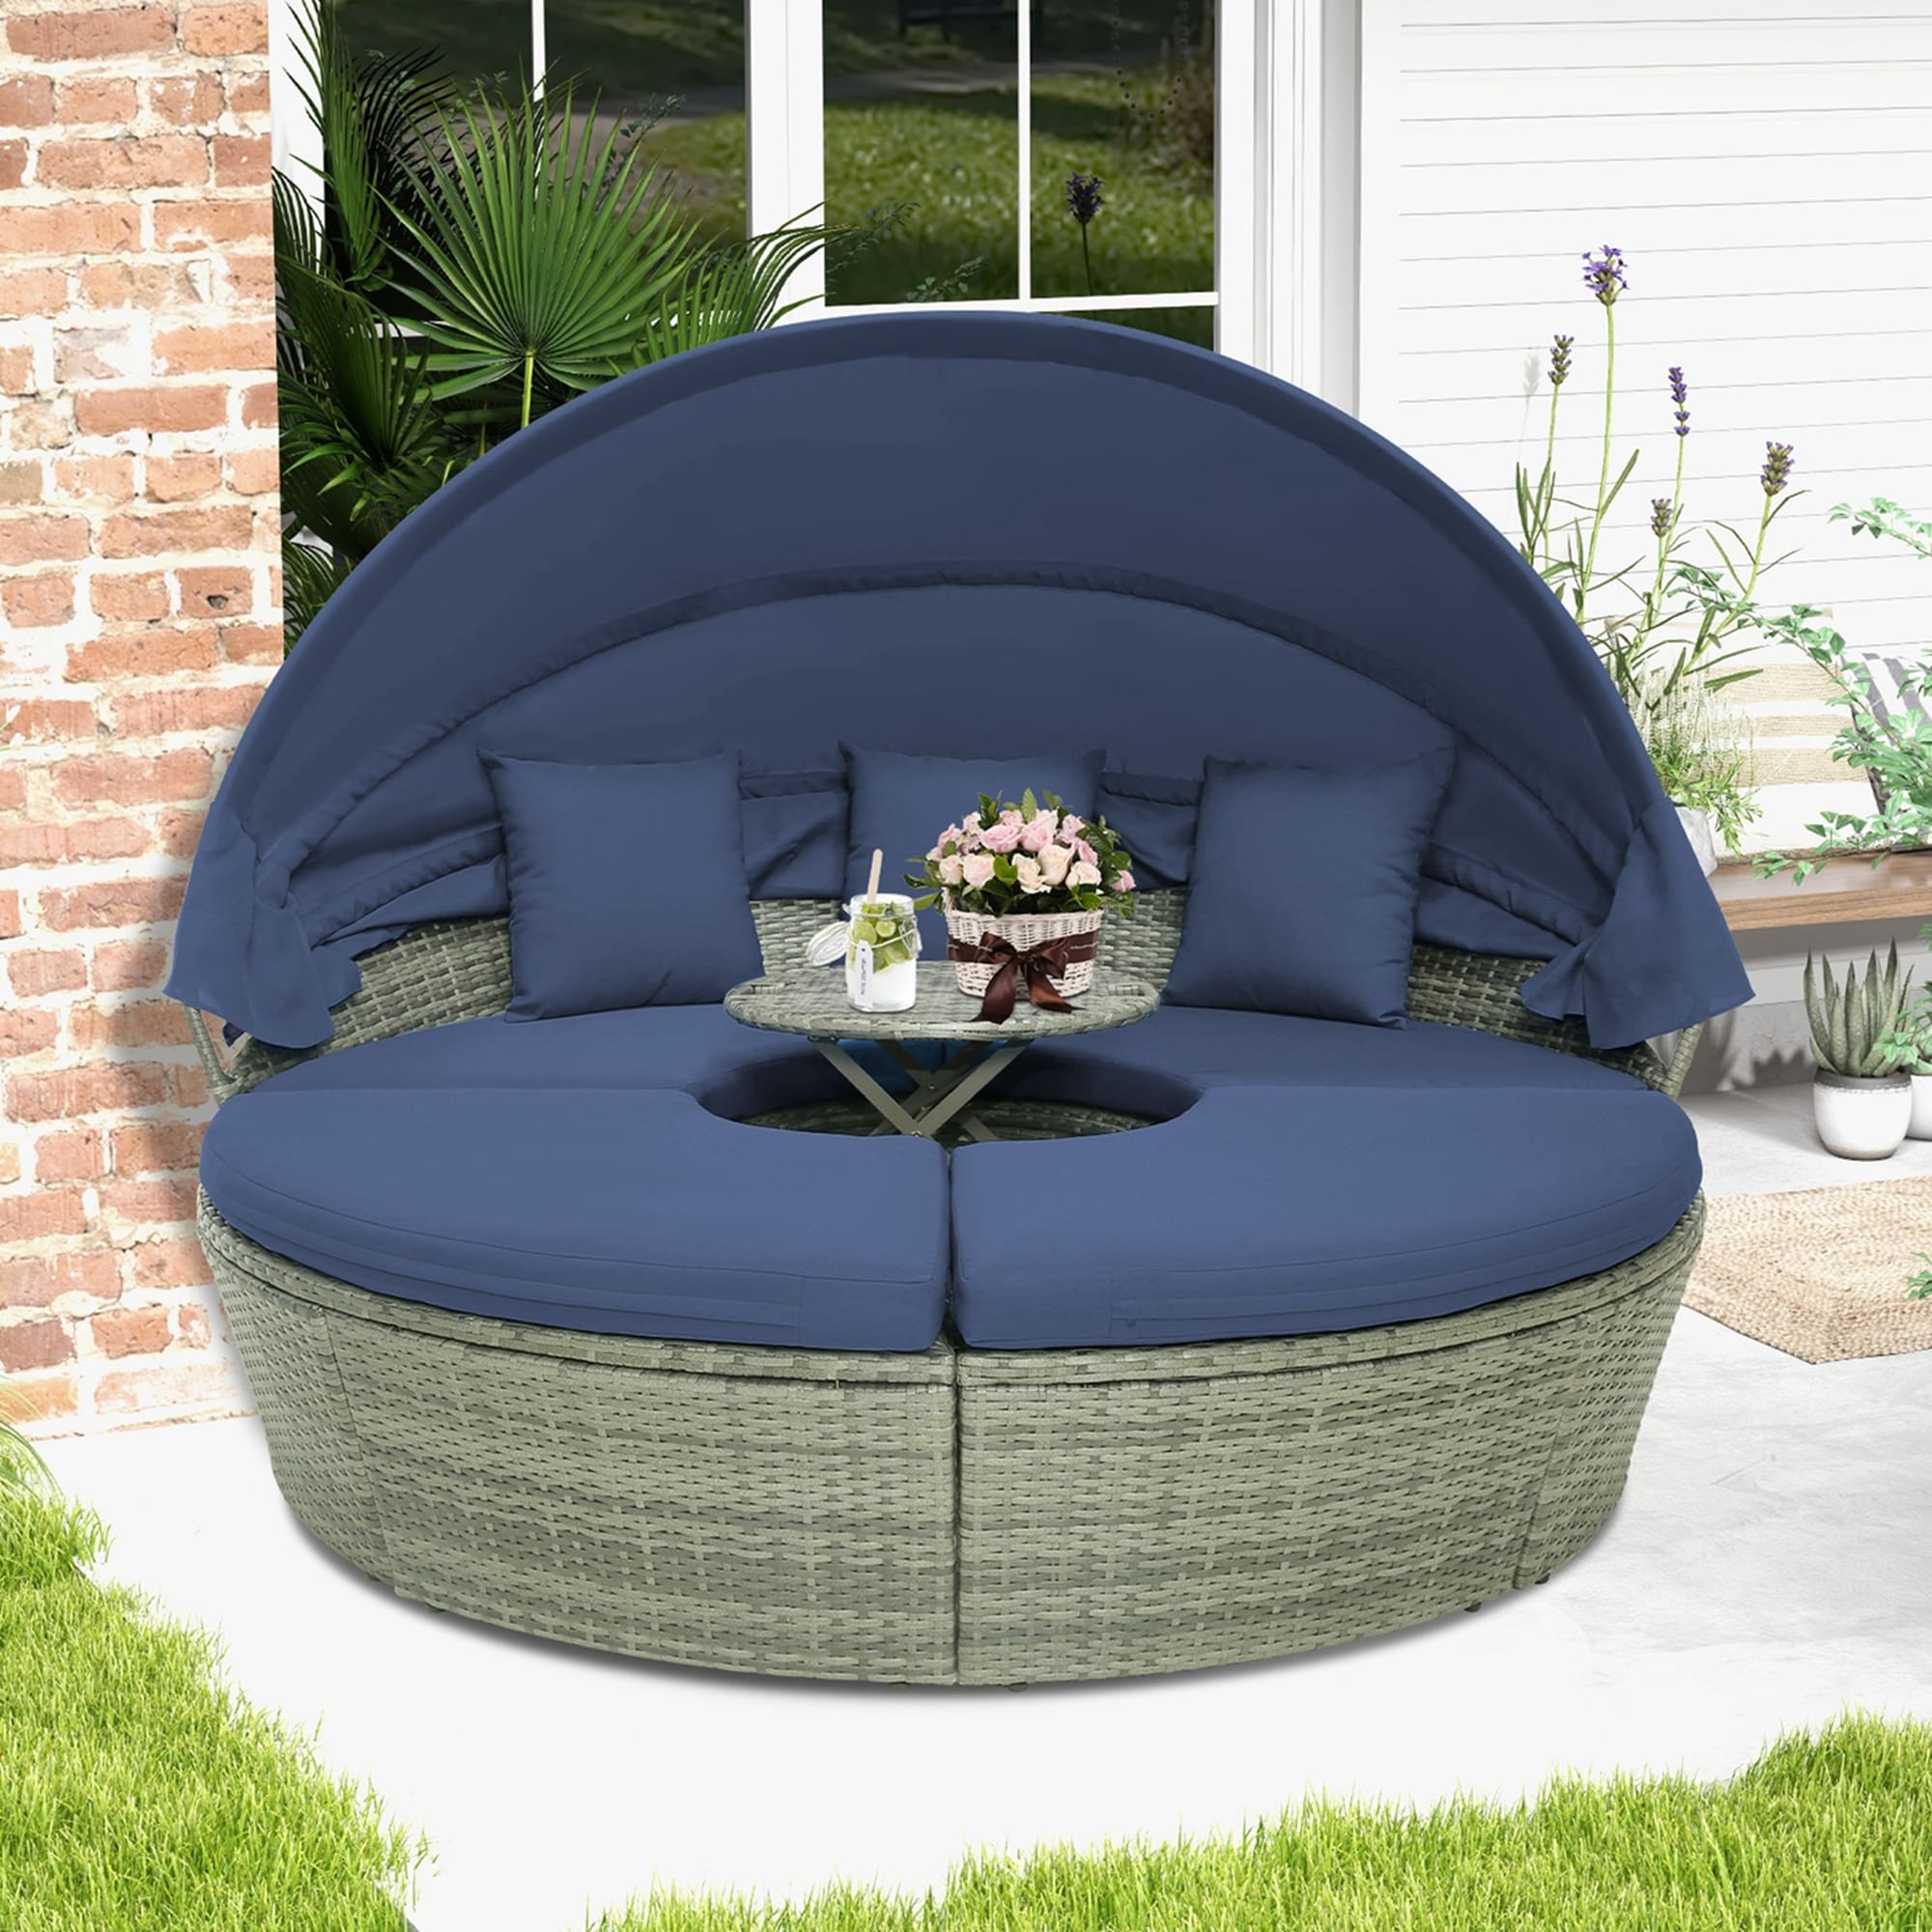 https://ak1.ostkcdn.com/images/products/is/images/direct/f9ed33b0d7b406b4e23b530e97d6b2794145dabd/Costway-Patio-Rattan-Daybed-Outdoor-Sectional-Seating-with-Side-Table.jpg